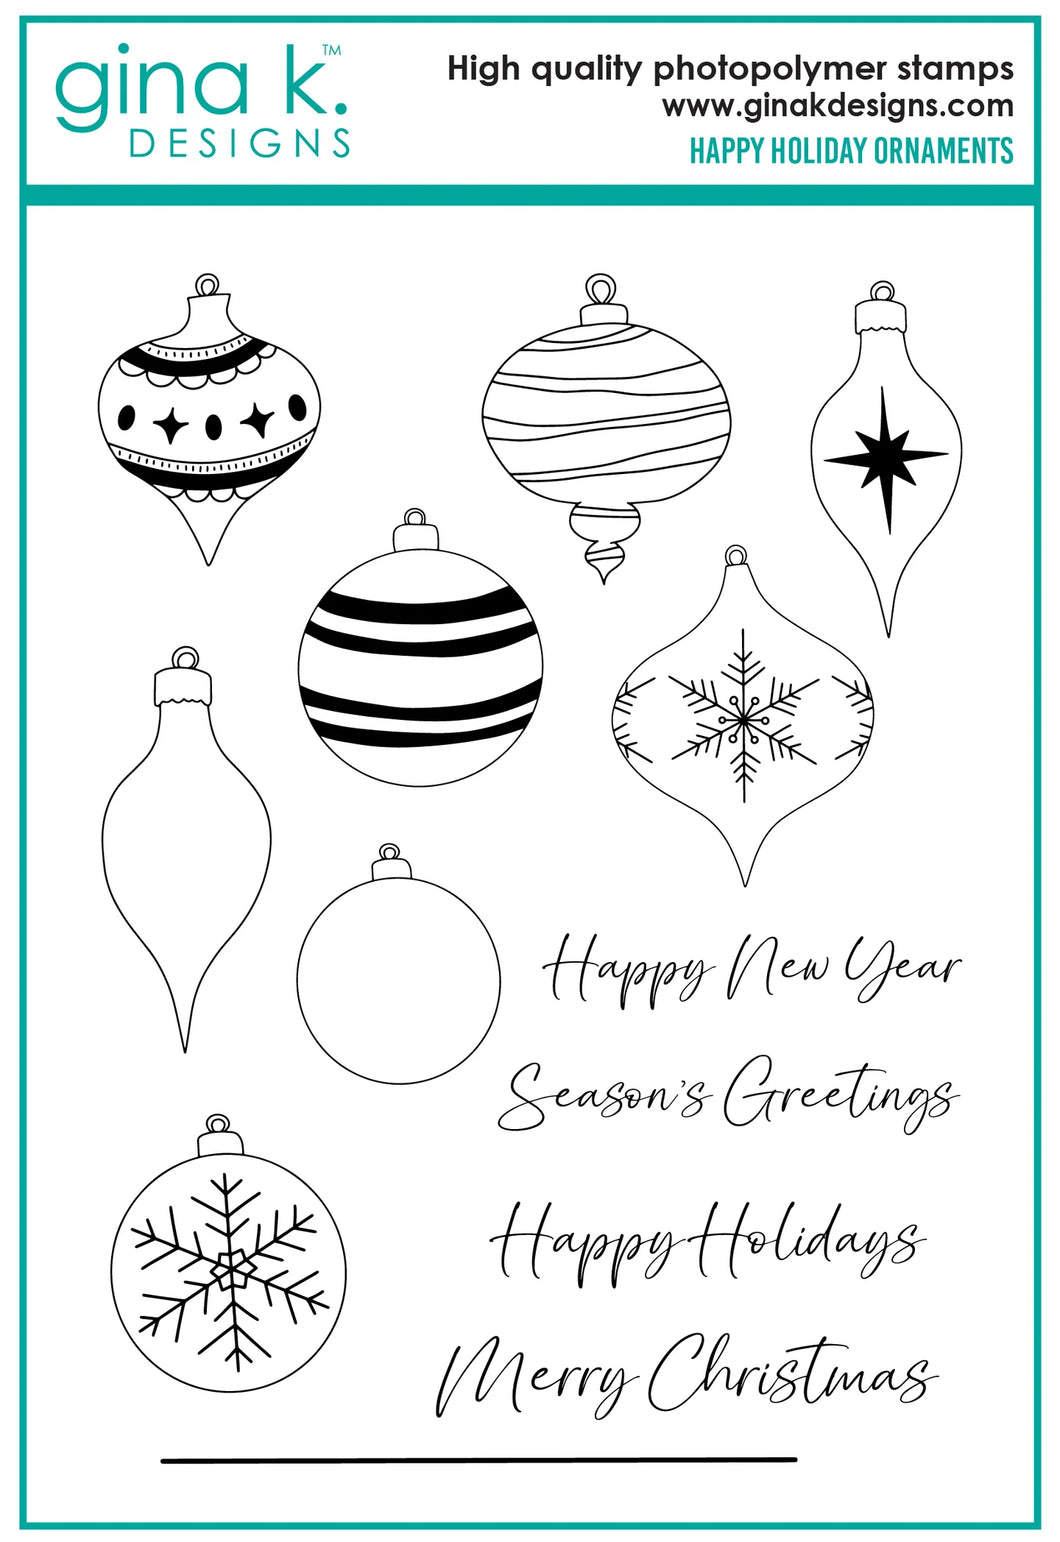 Gina K. Designs - Stamp & Die Set - Happy Holiday Ornaments. Happy Holiday Ornaments is a stamp and die set by Hannah Drapinski. This set is made of premium clear photopolymer and measures 6